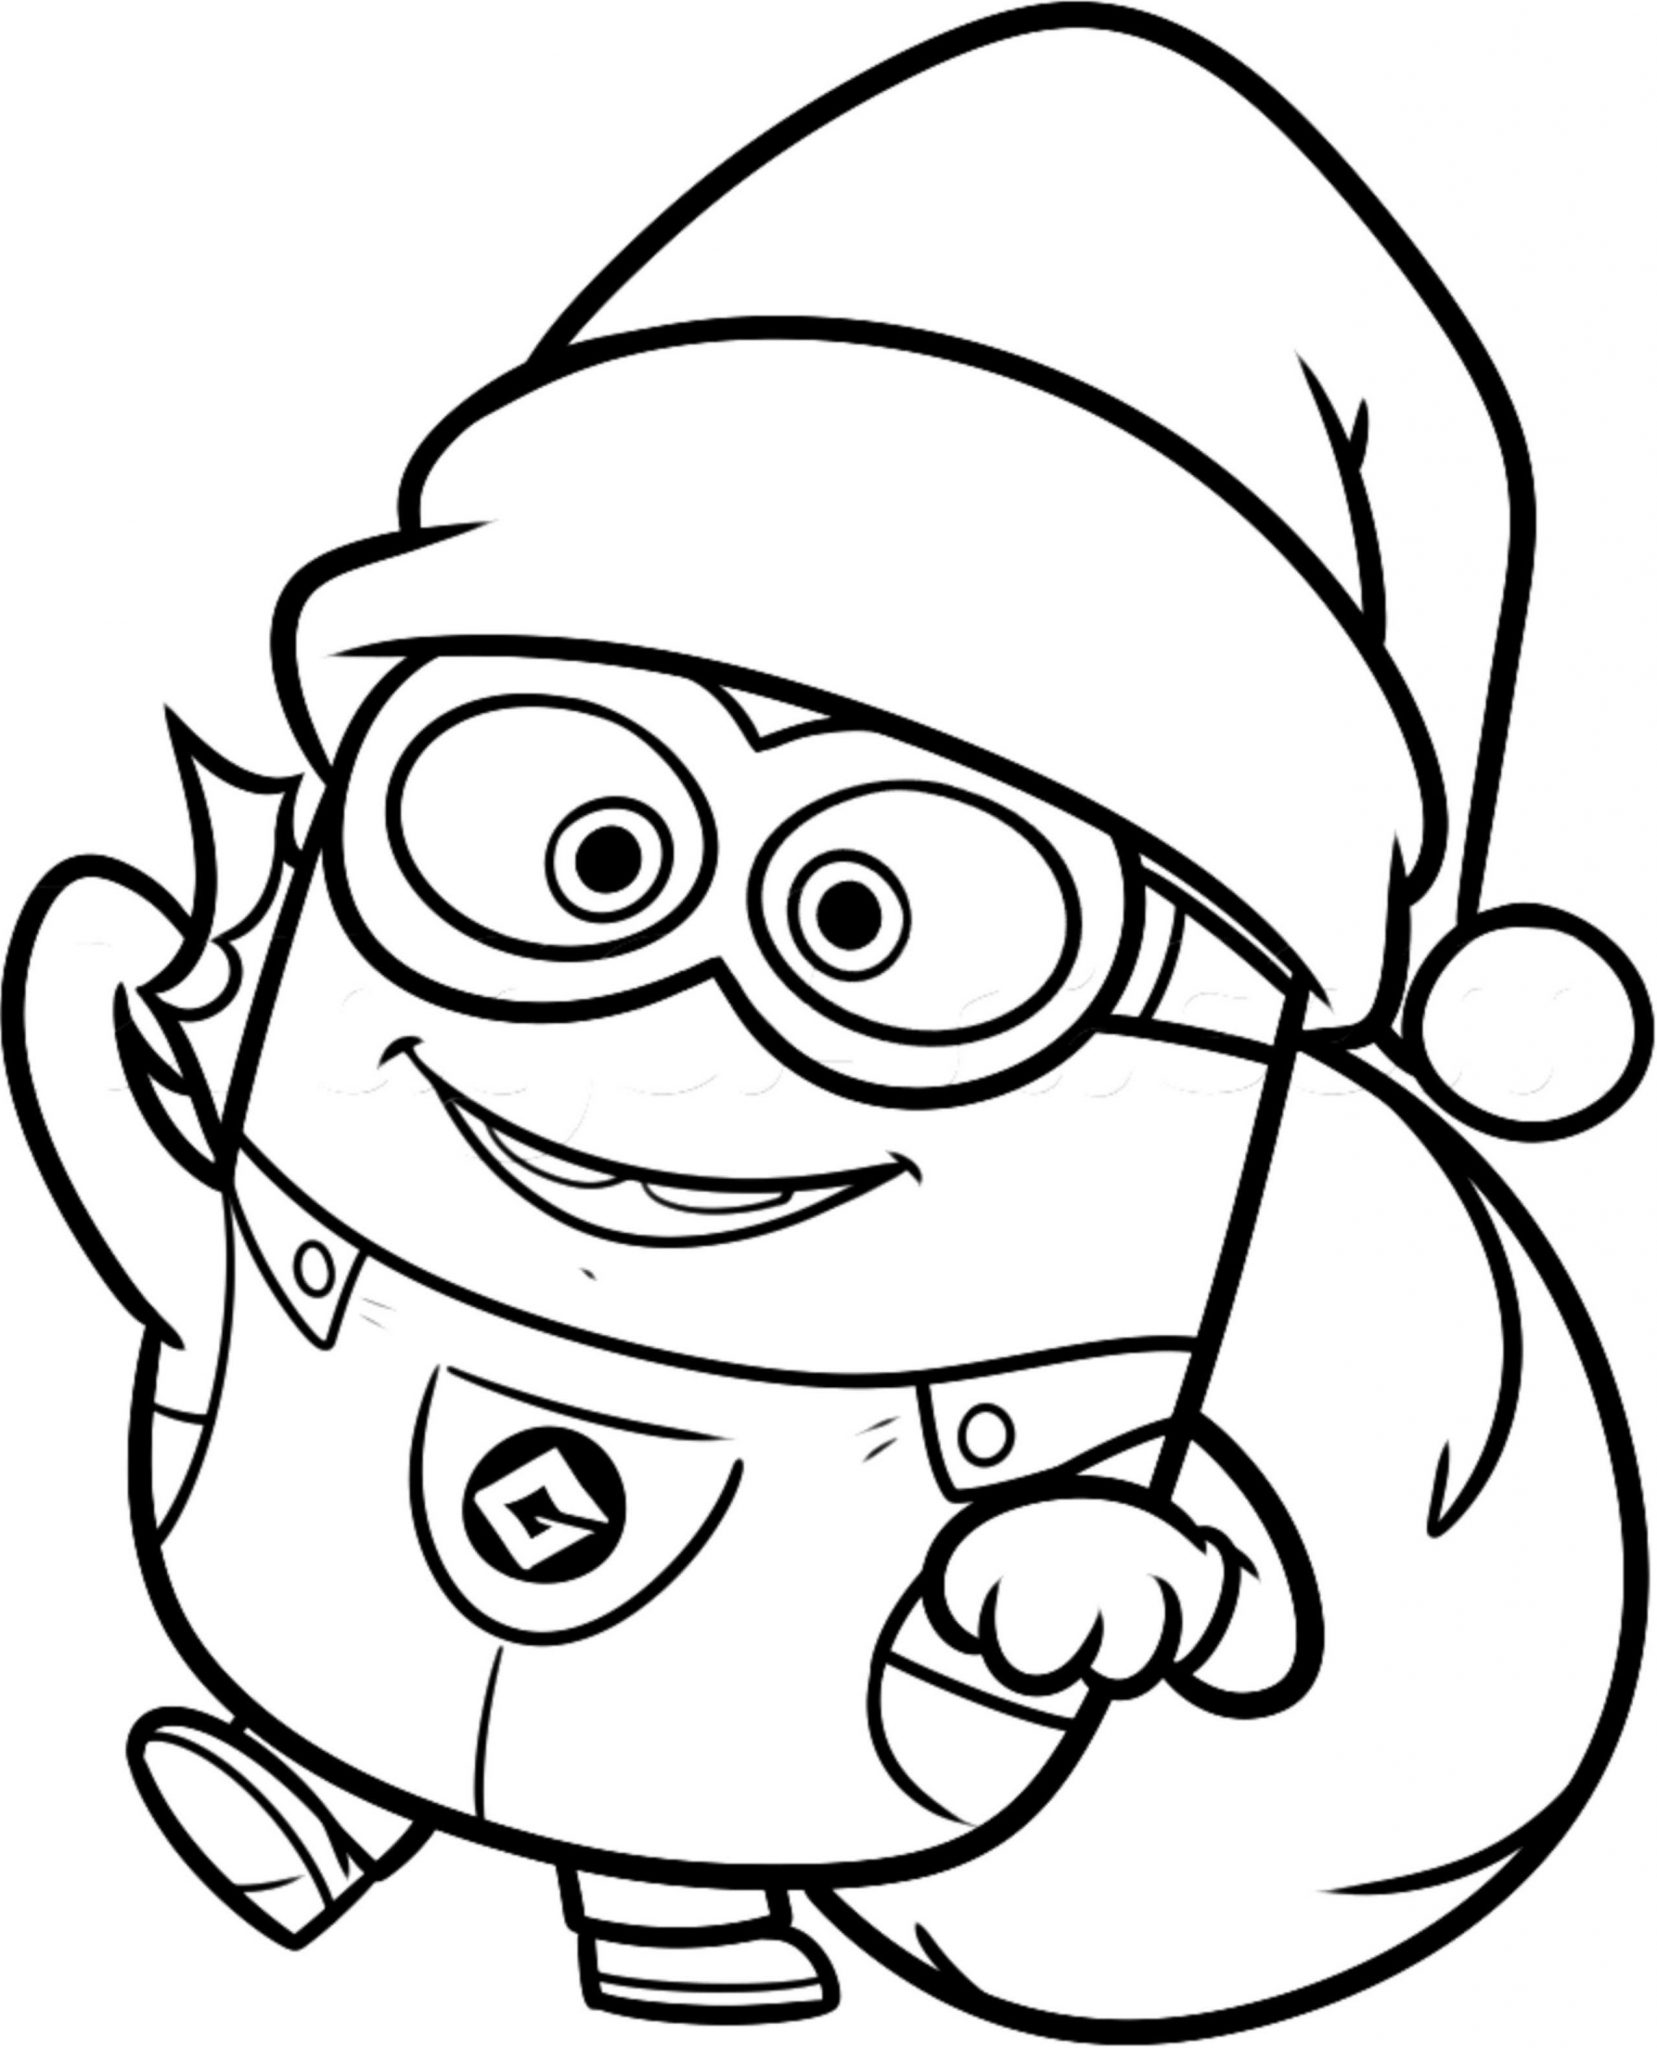 Print & Download   Minion Coloring Pages for Kids to Have Fun